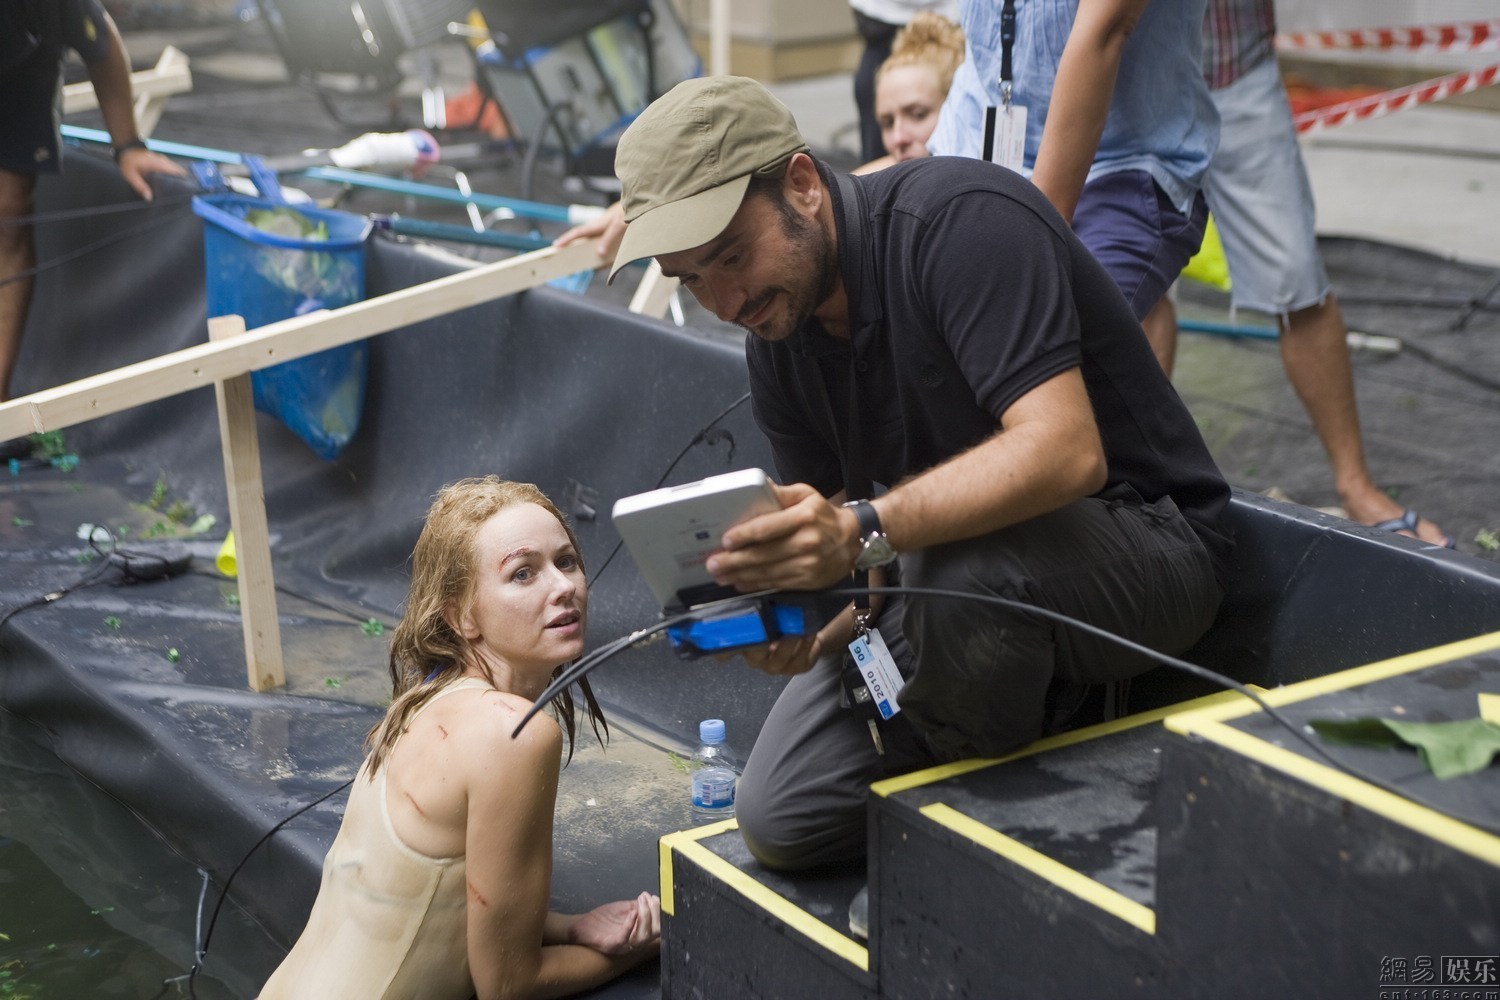 The Impossible (2012) Behind the Scenes